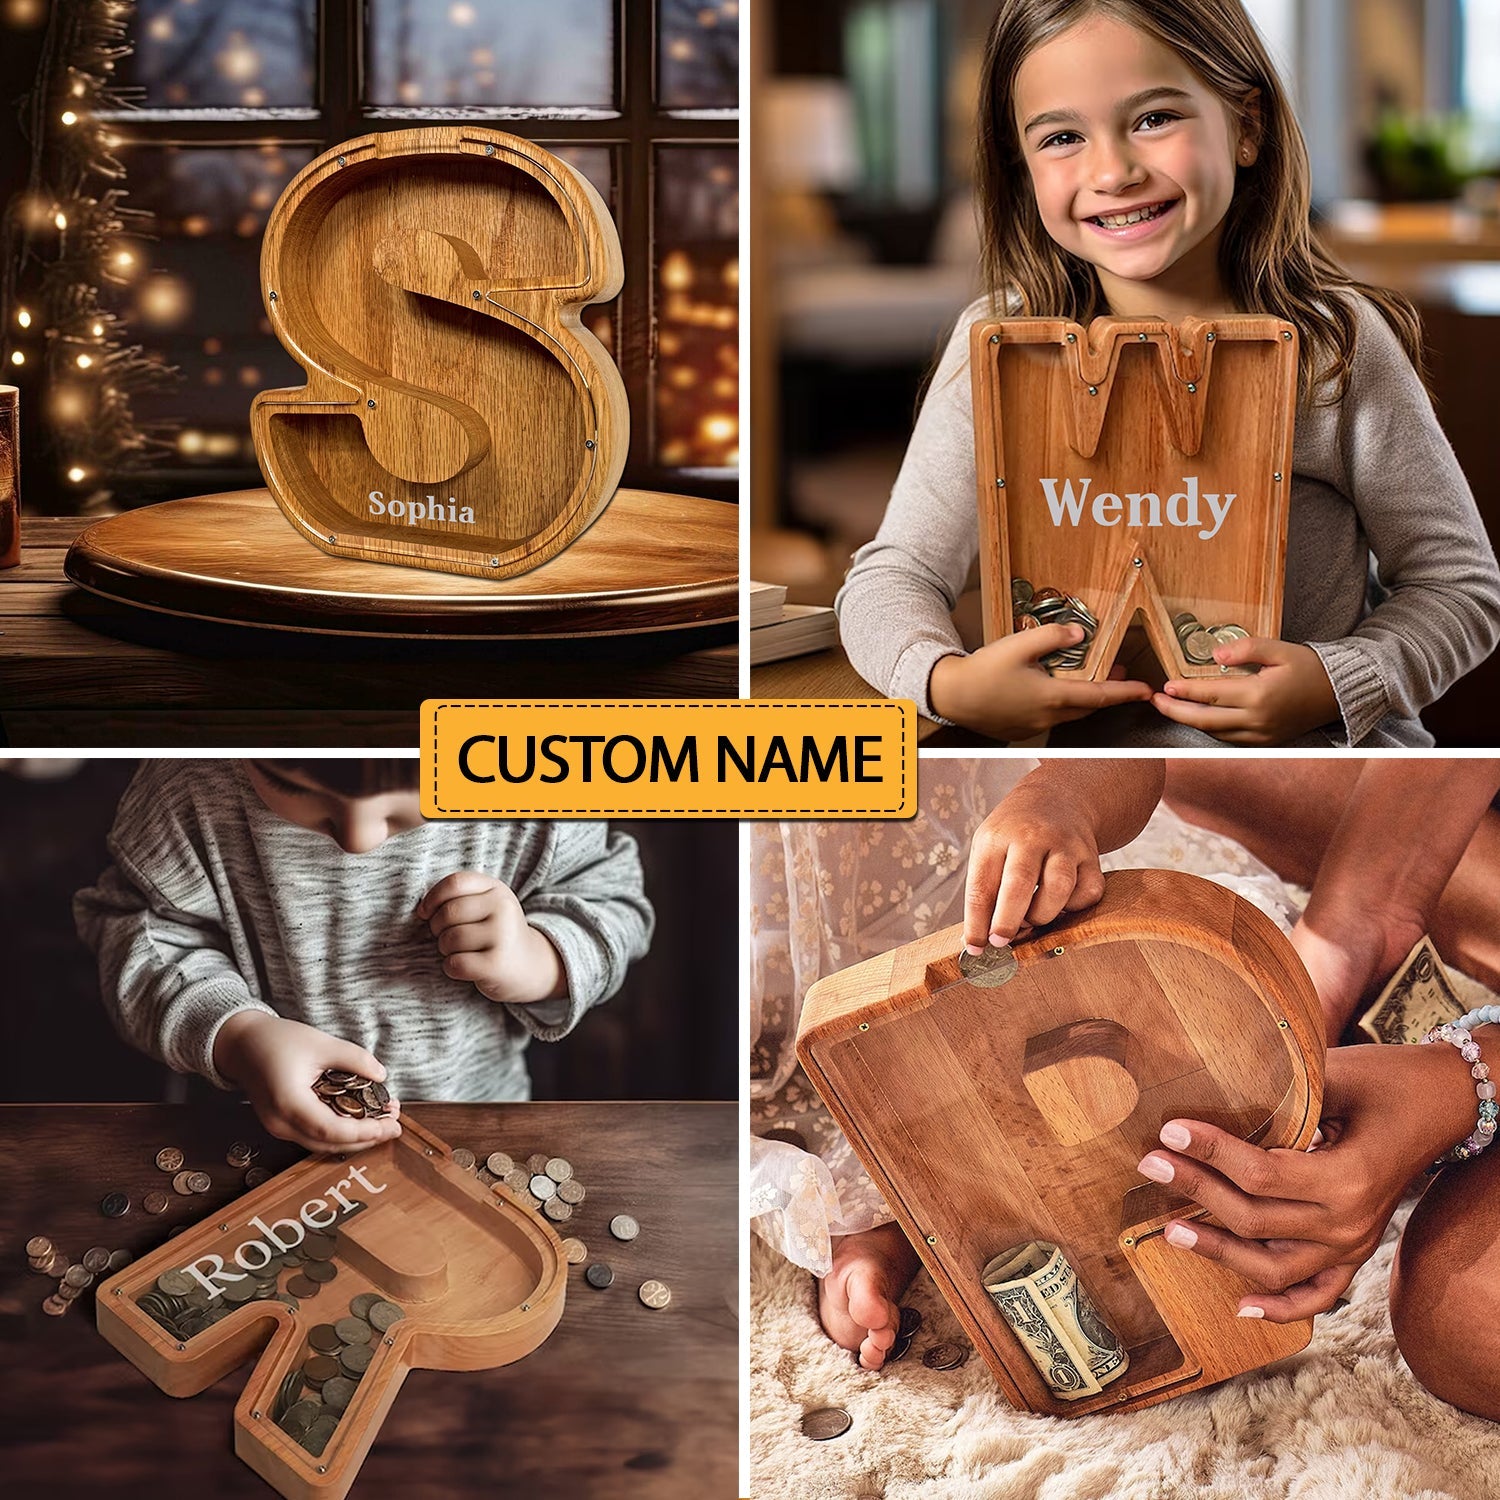 Personalize Wooden Letter Piggy Bank, Custom Initial Name Bank, Name Money Box, Coin Bank,Birthday Gift for Boy Girl,Christmas Gift for Kids